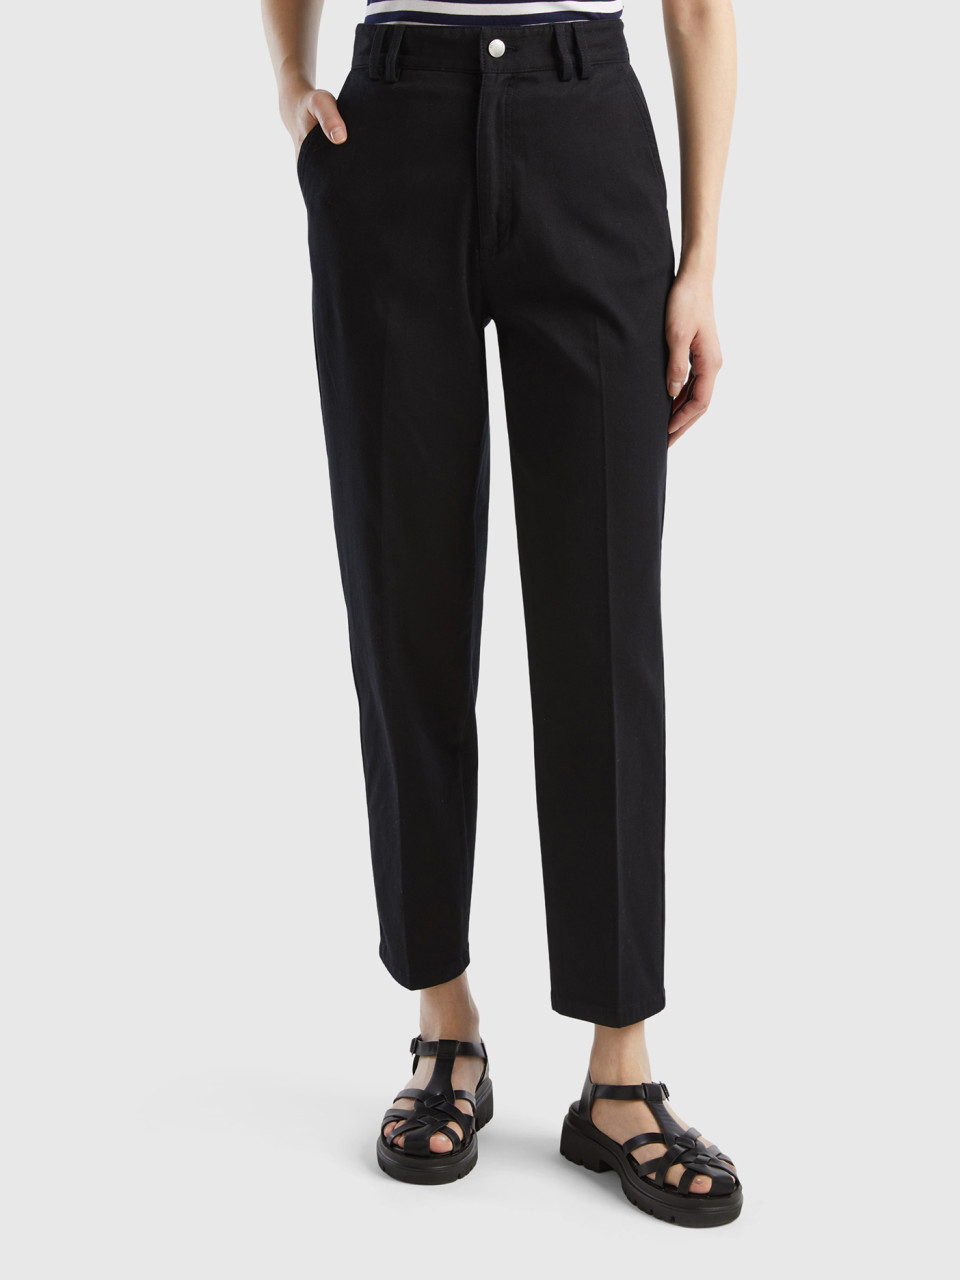 Benetton, Chino Trousers In Cotton And Modal®, Black, Women